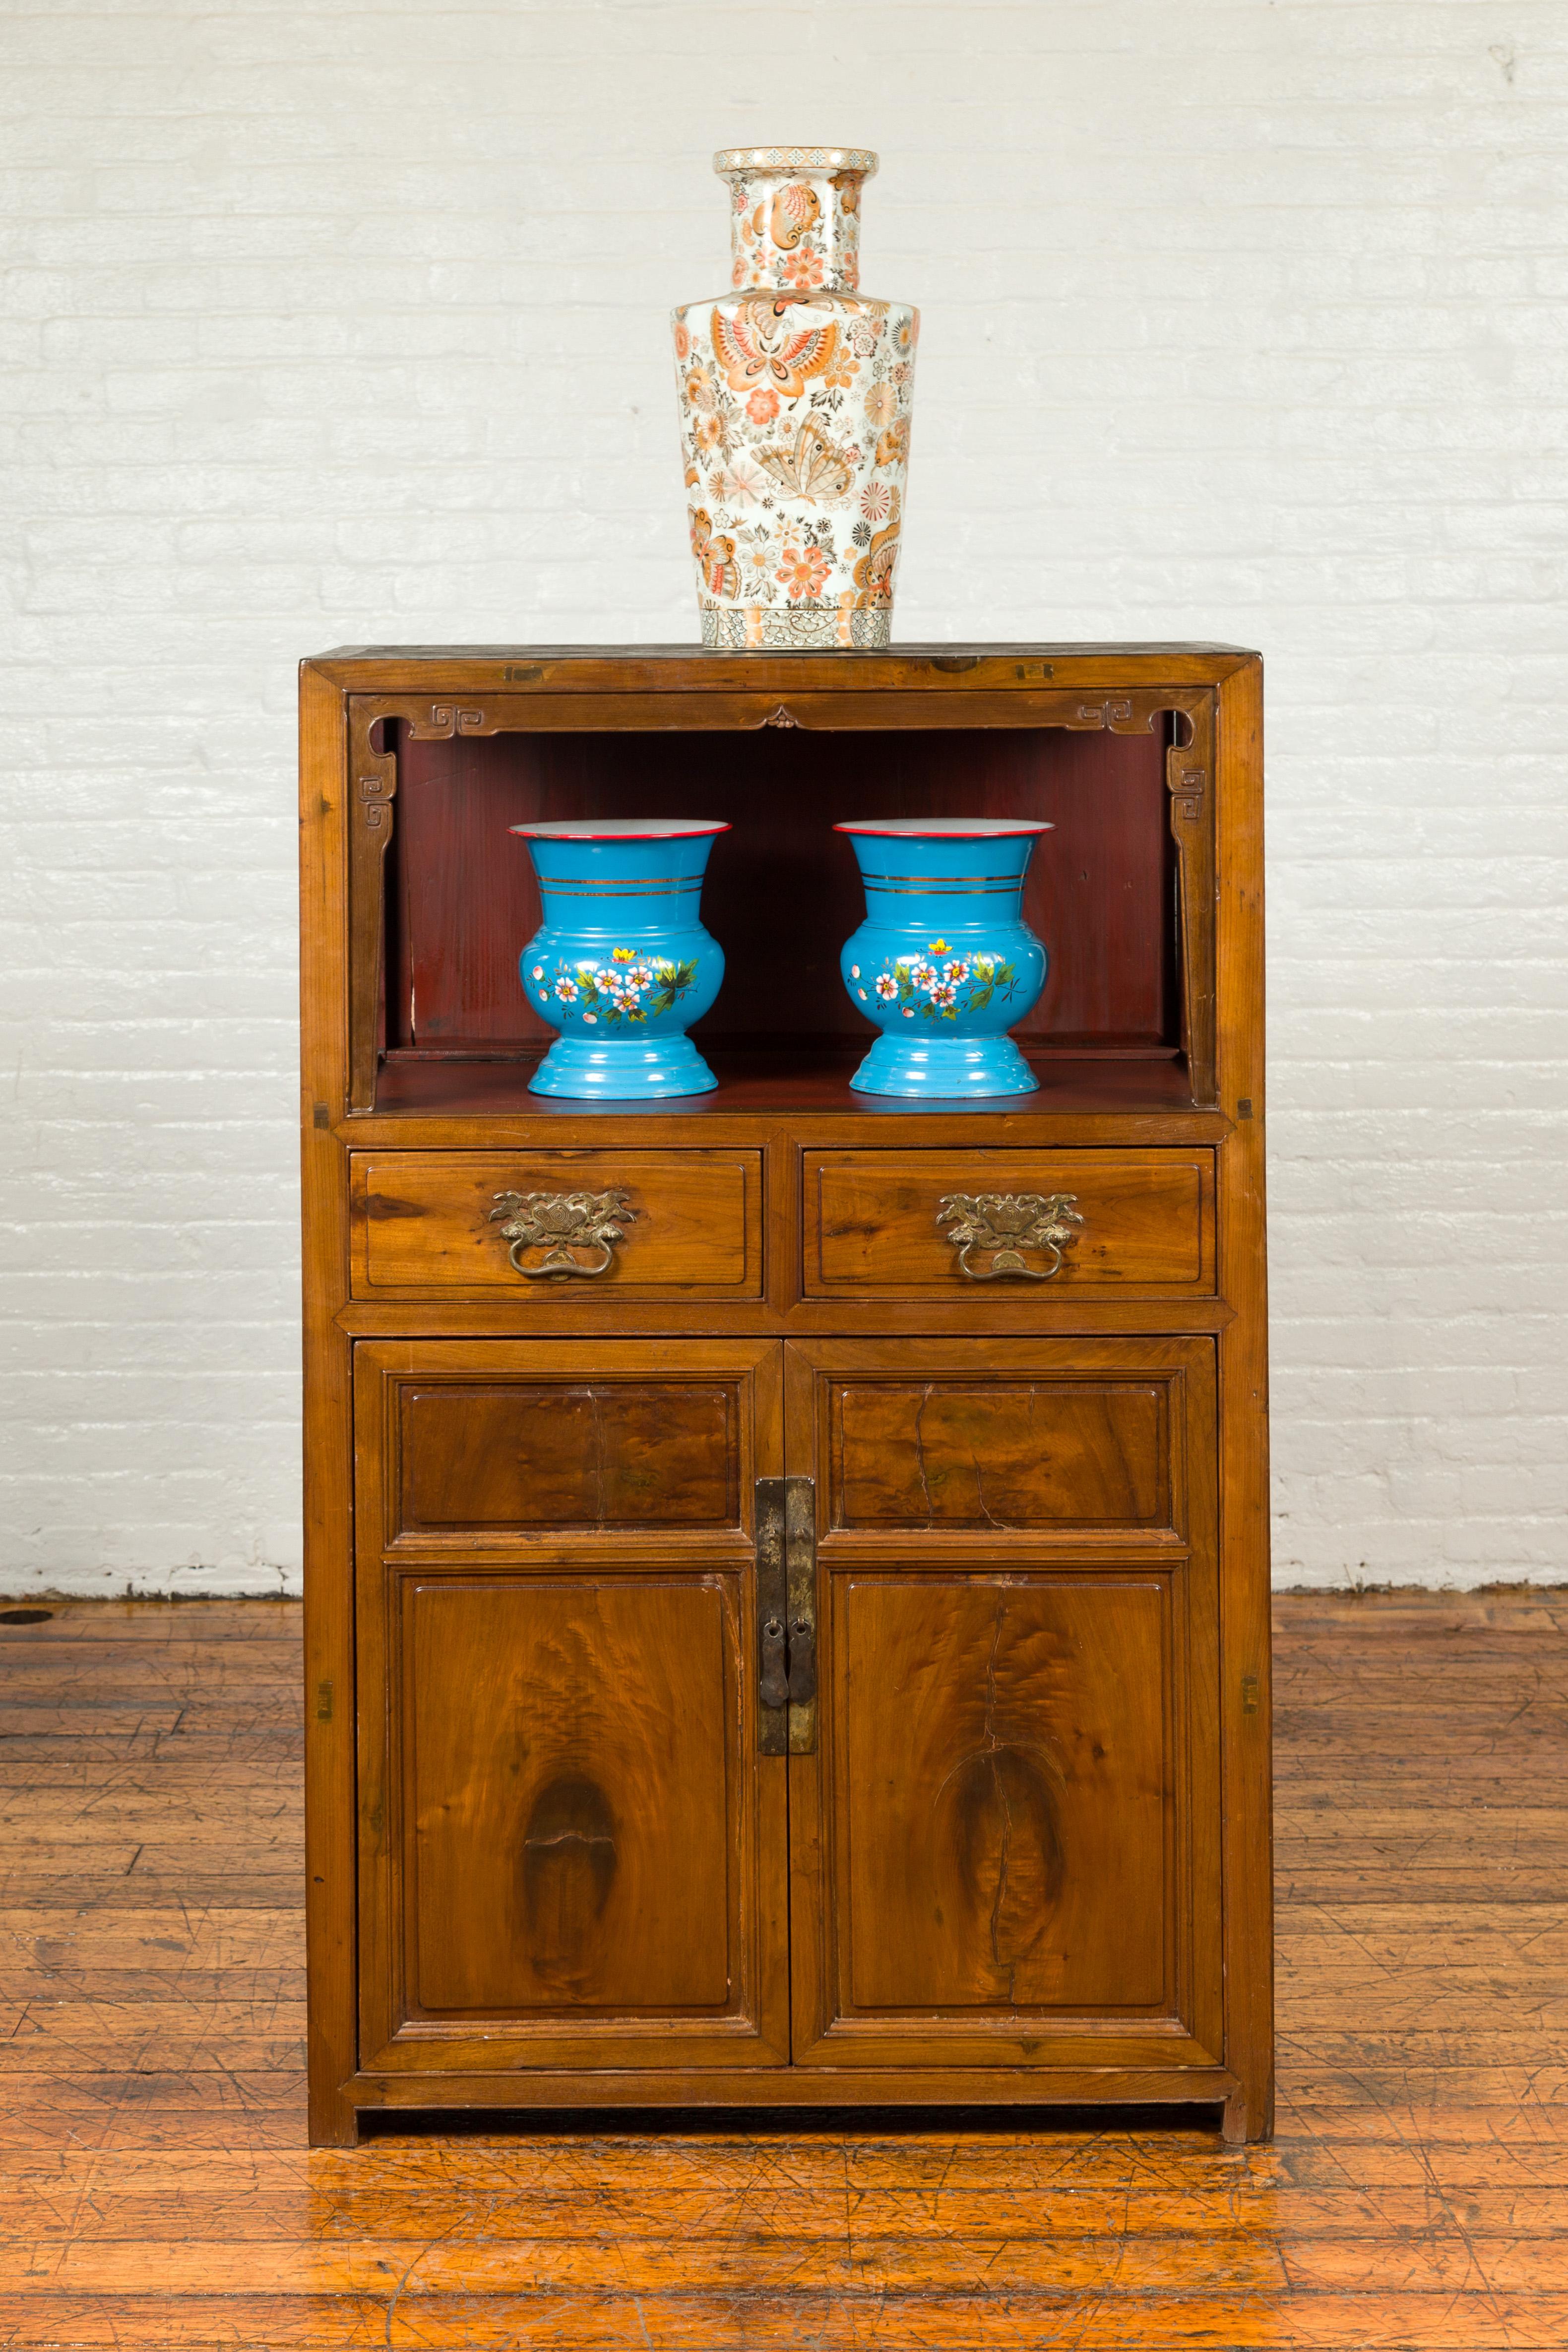 19th Century Chinese Qing Dynasty Period Bookcase with Open Shelf and Drawers over Doors 